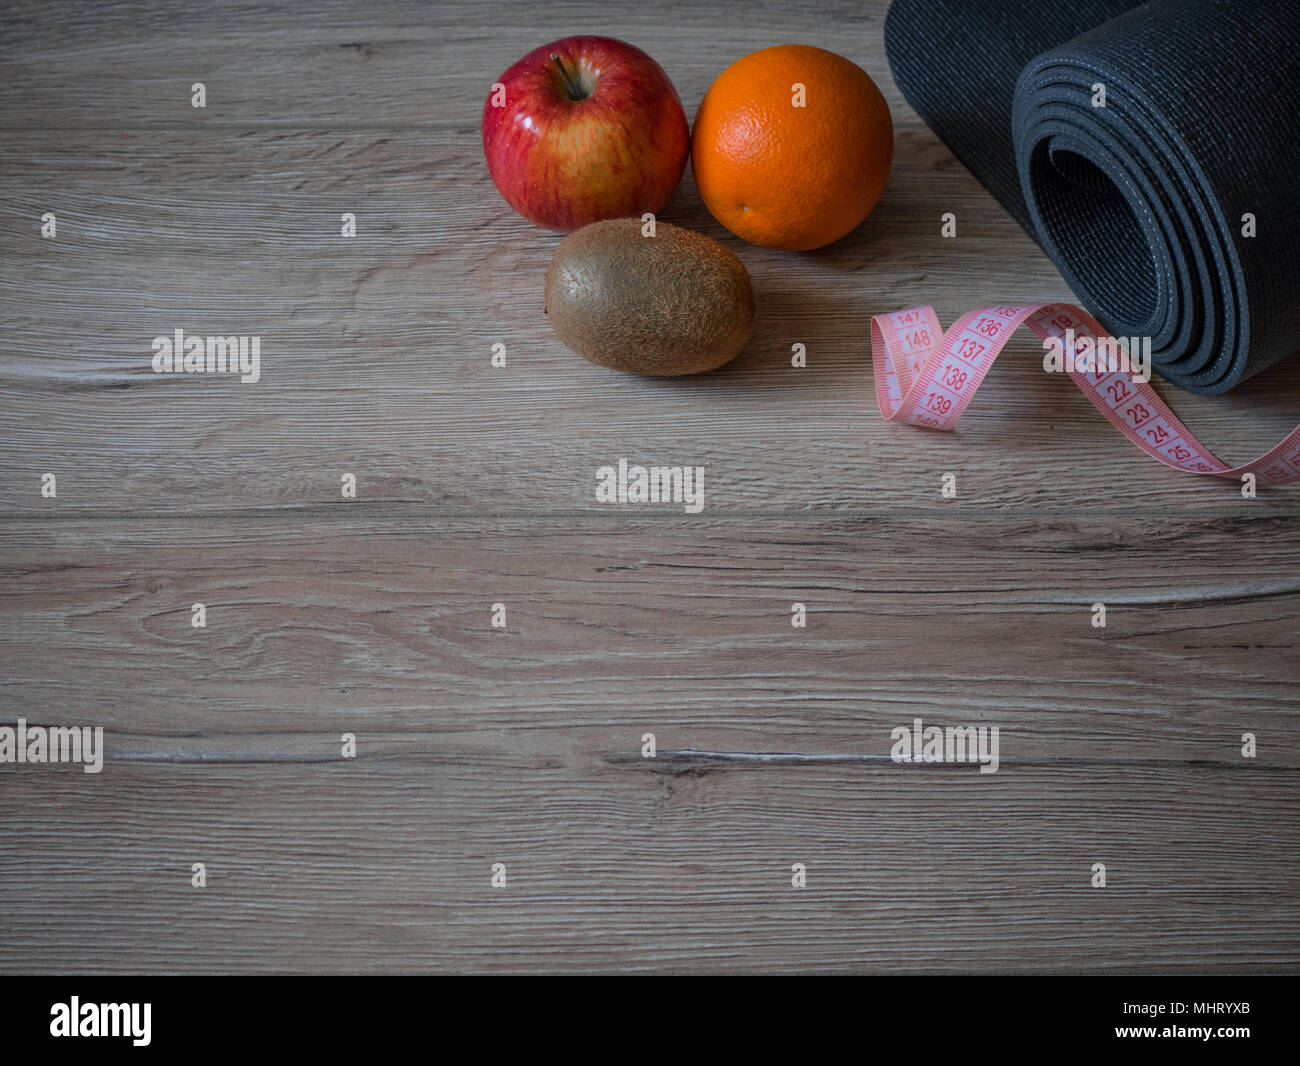 Fitness and Sport Consept. Women items for sports. Measuring tape, centimeter. The concept of sport for weight loss. Bottle of water. Fruits. Flatlay. Stock Photo